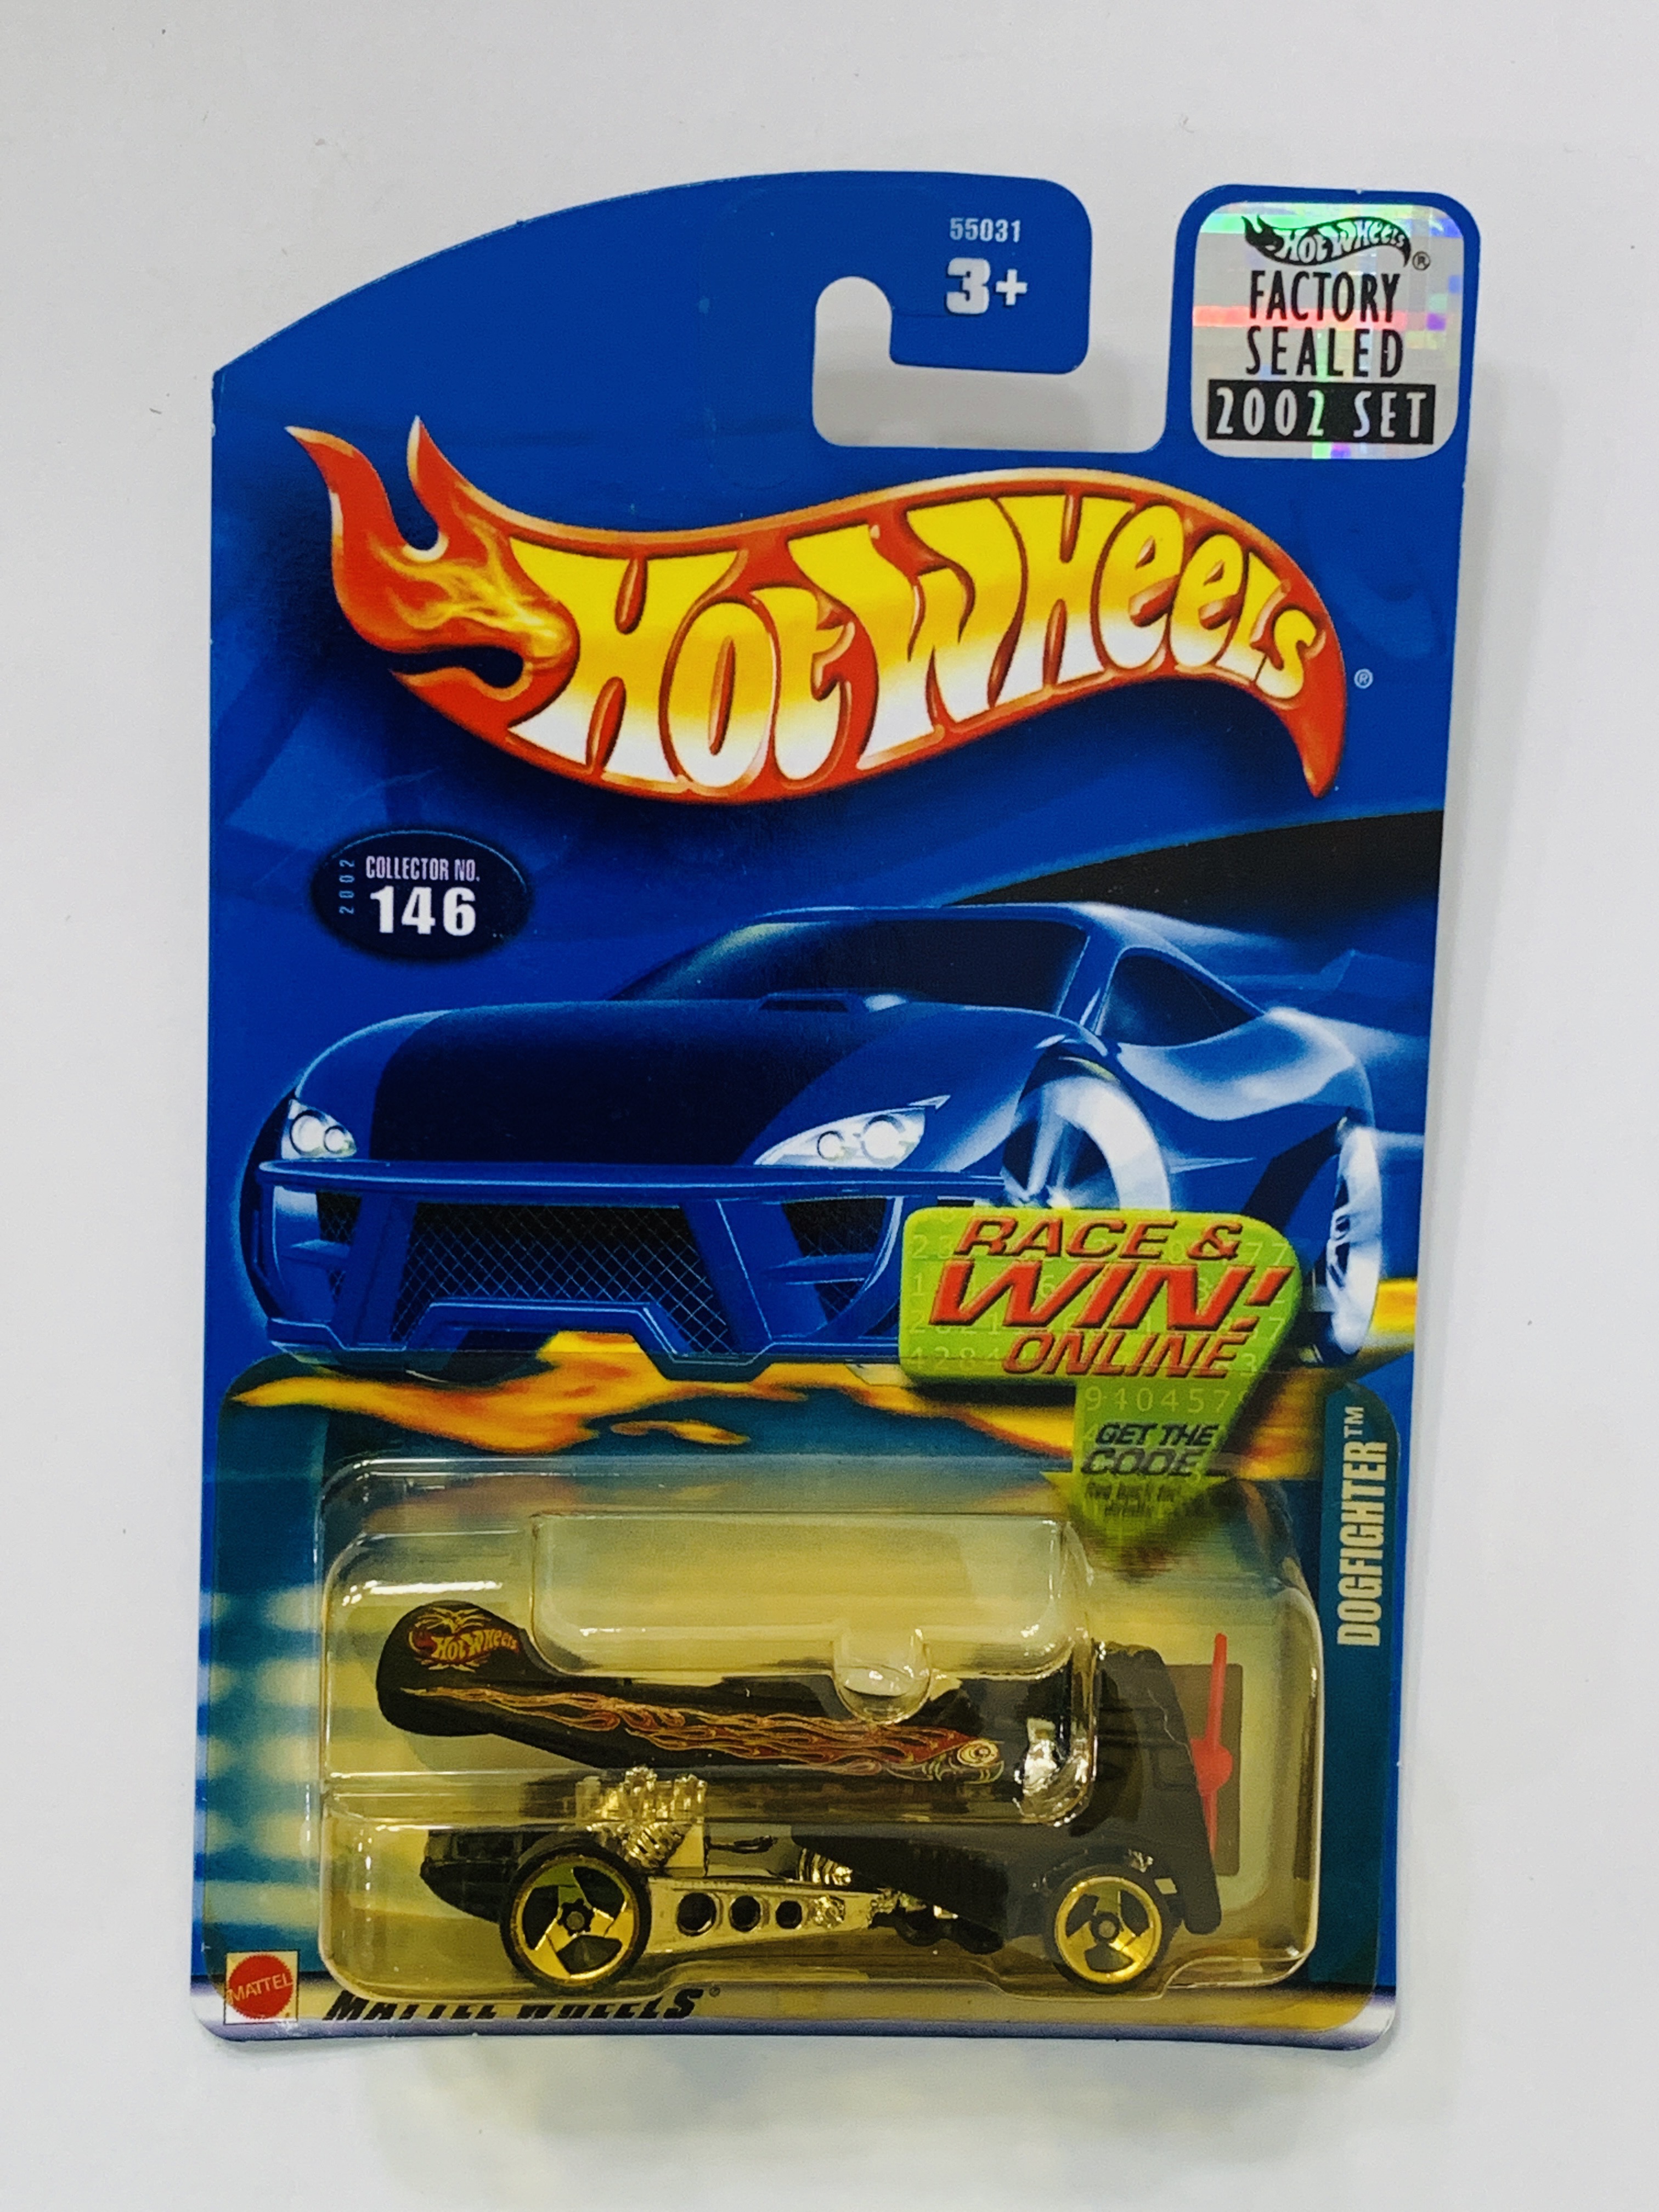 Hot Wheels 2002 Factory Set #146 Dogfighter - Yellowed Blister